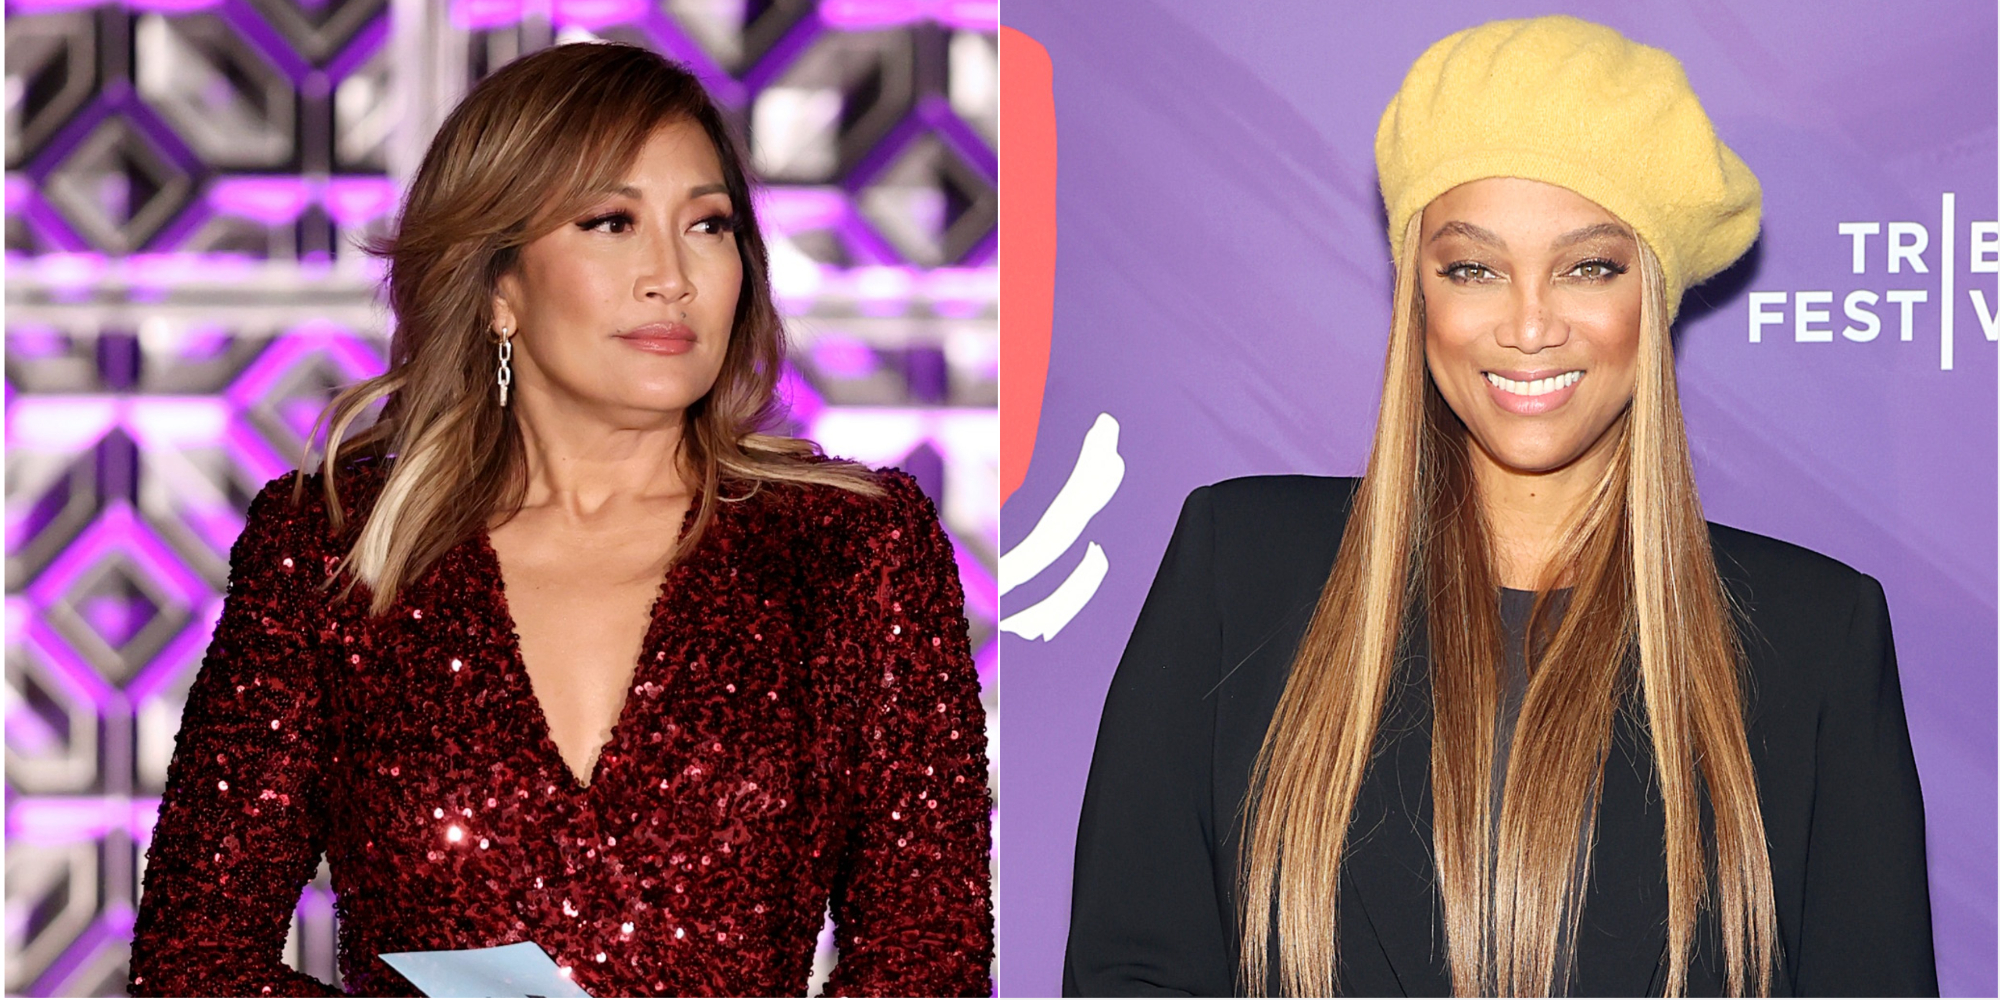 'Dancing With the Stars' Carrie Ann Inaba and Tyra Banks in side by side photographs.